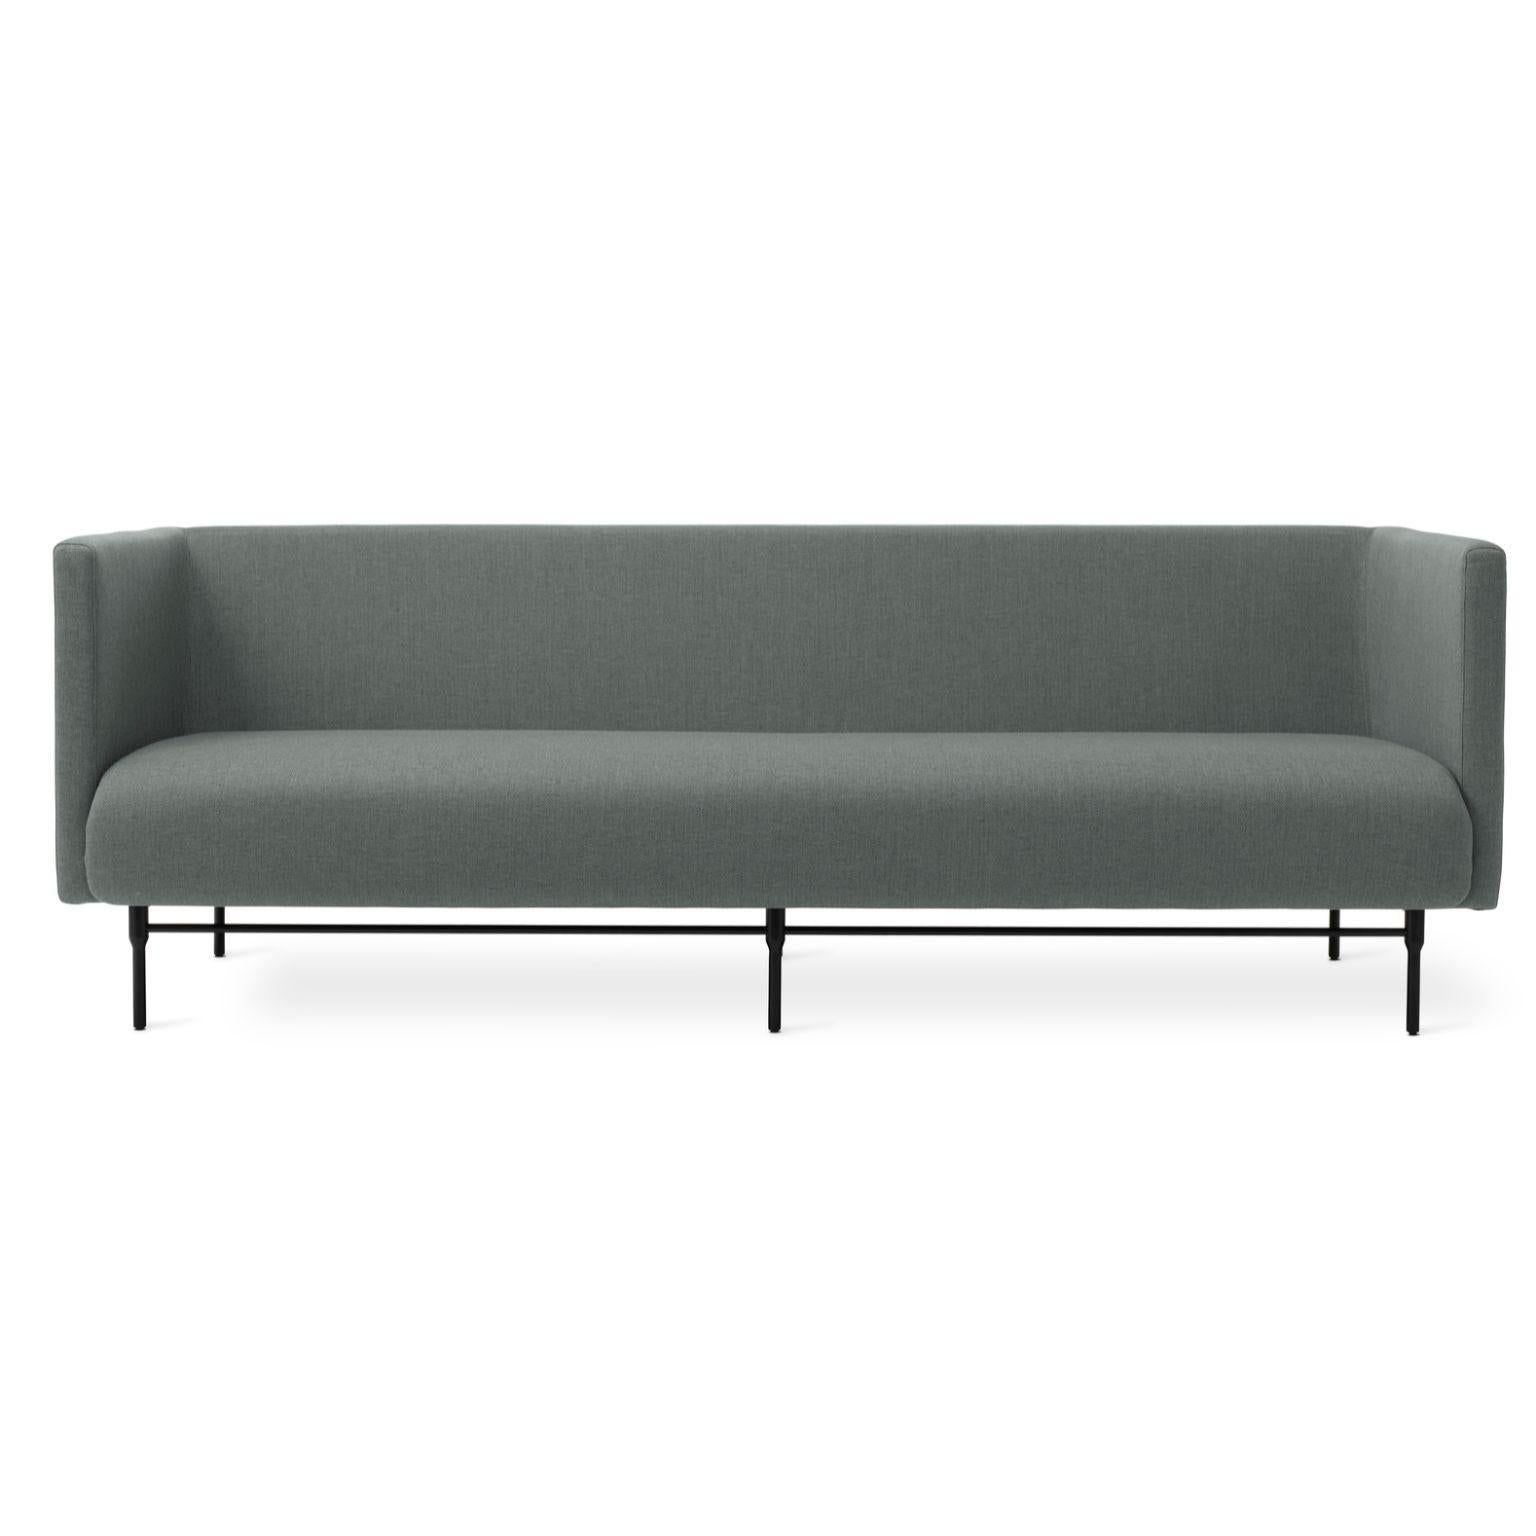 Galore 3 seater light teal by Warm Nordic
Dimensions: D 222 x W 83 x H 76 cm
Material: Textile upholstery, Powder coated black steel legs, Wooden frame, foam, spring system.
Weight: 62 kg
Also available in different colours and finishes.

Warm